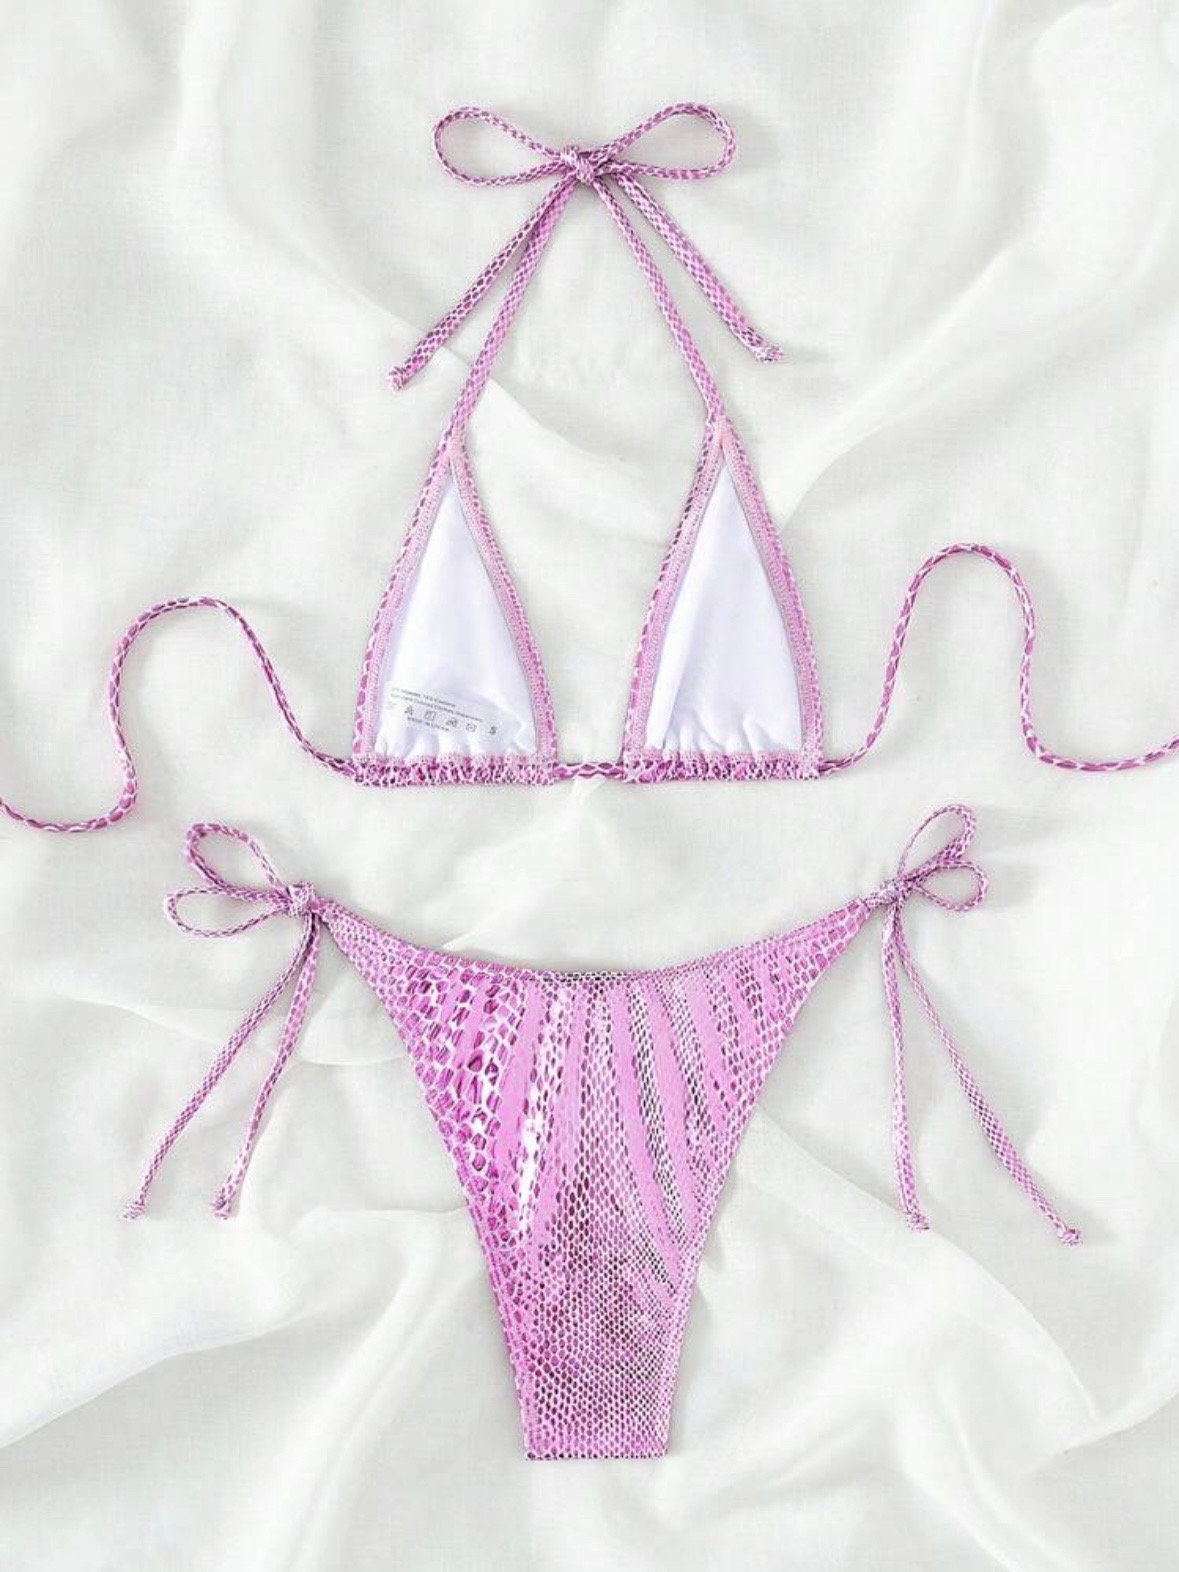 The Sarah Metallic Snake Purple bikini with tie sides and snake print details triangle halter top tie and bottoms swimsuit set